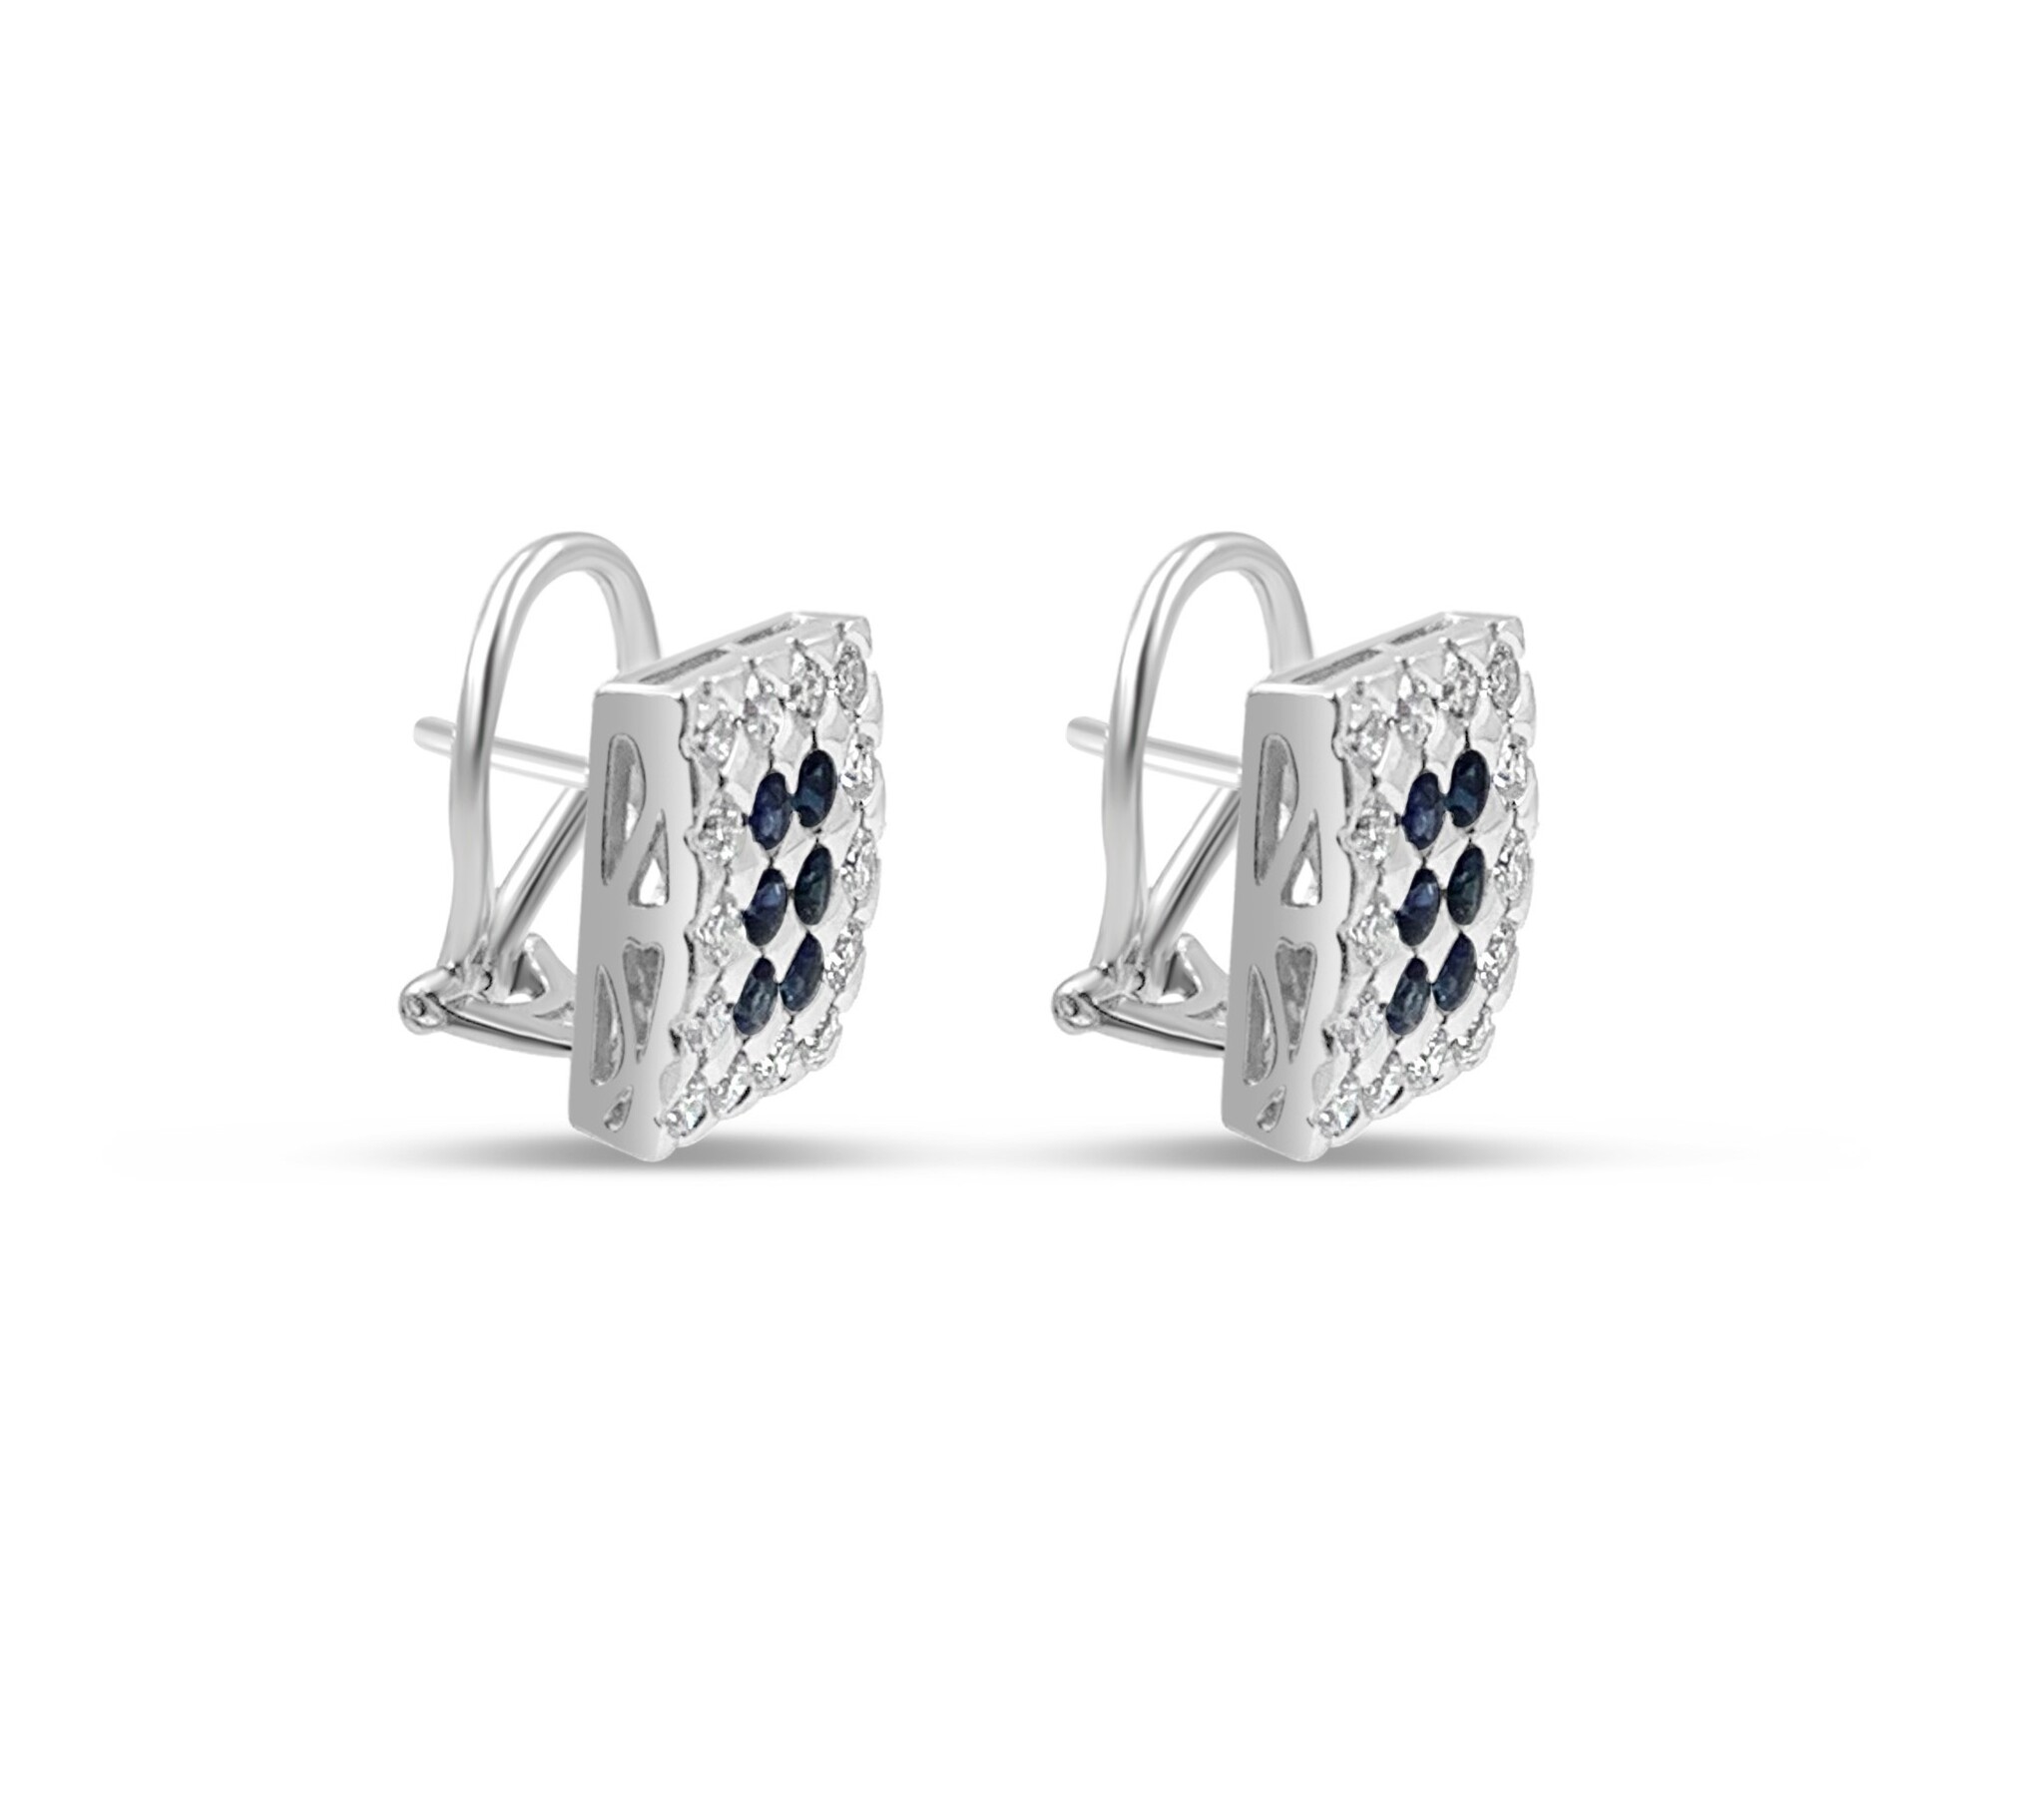 18k white gold earrings with 1,70ct diamonds & 0,75ct sapphire